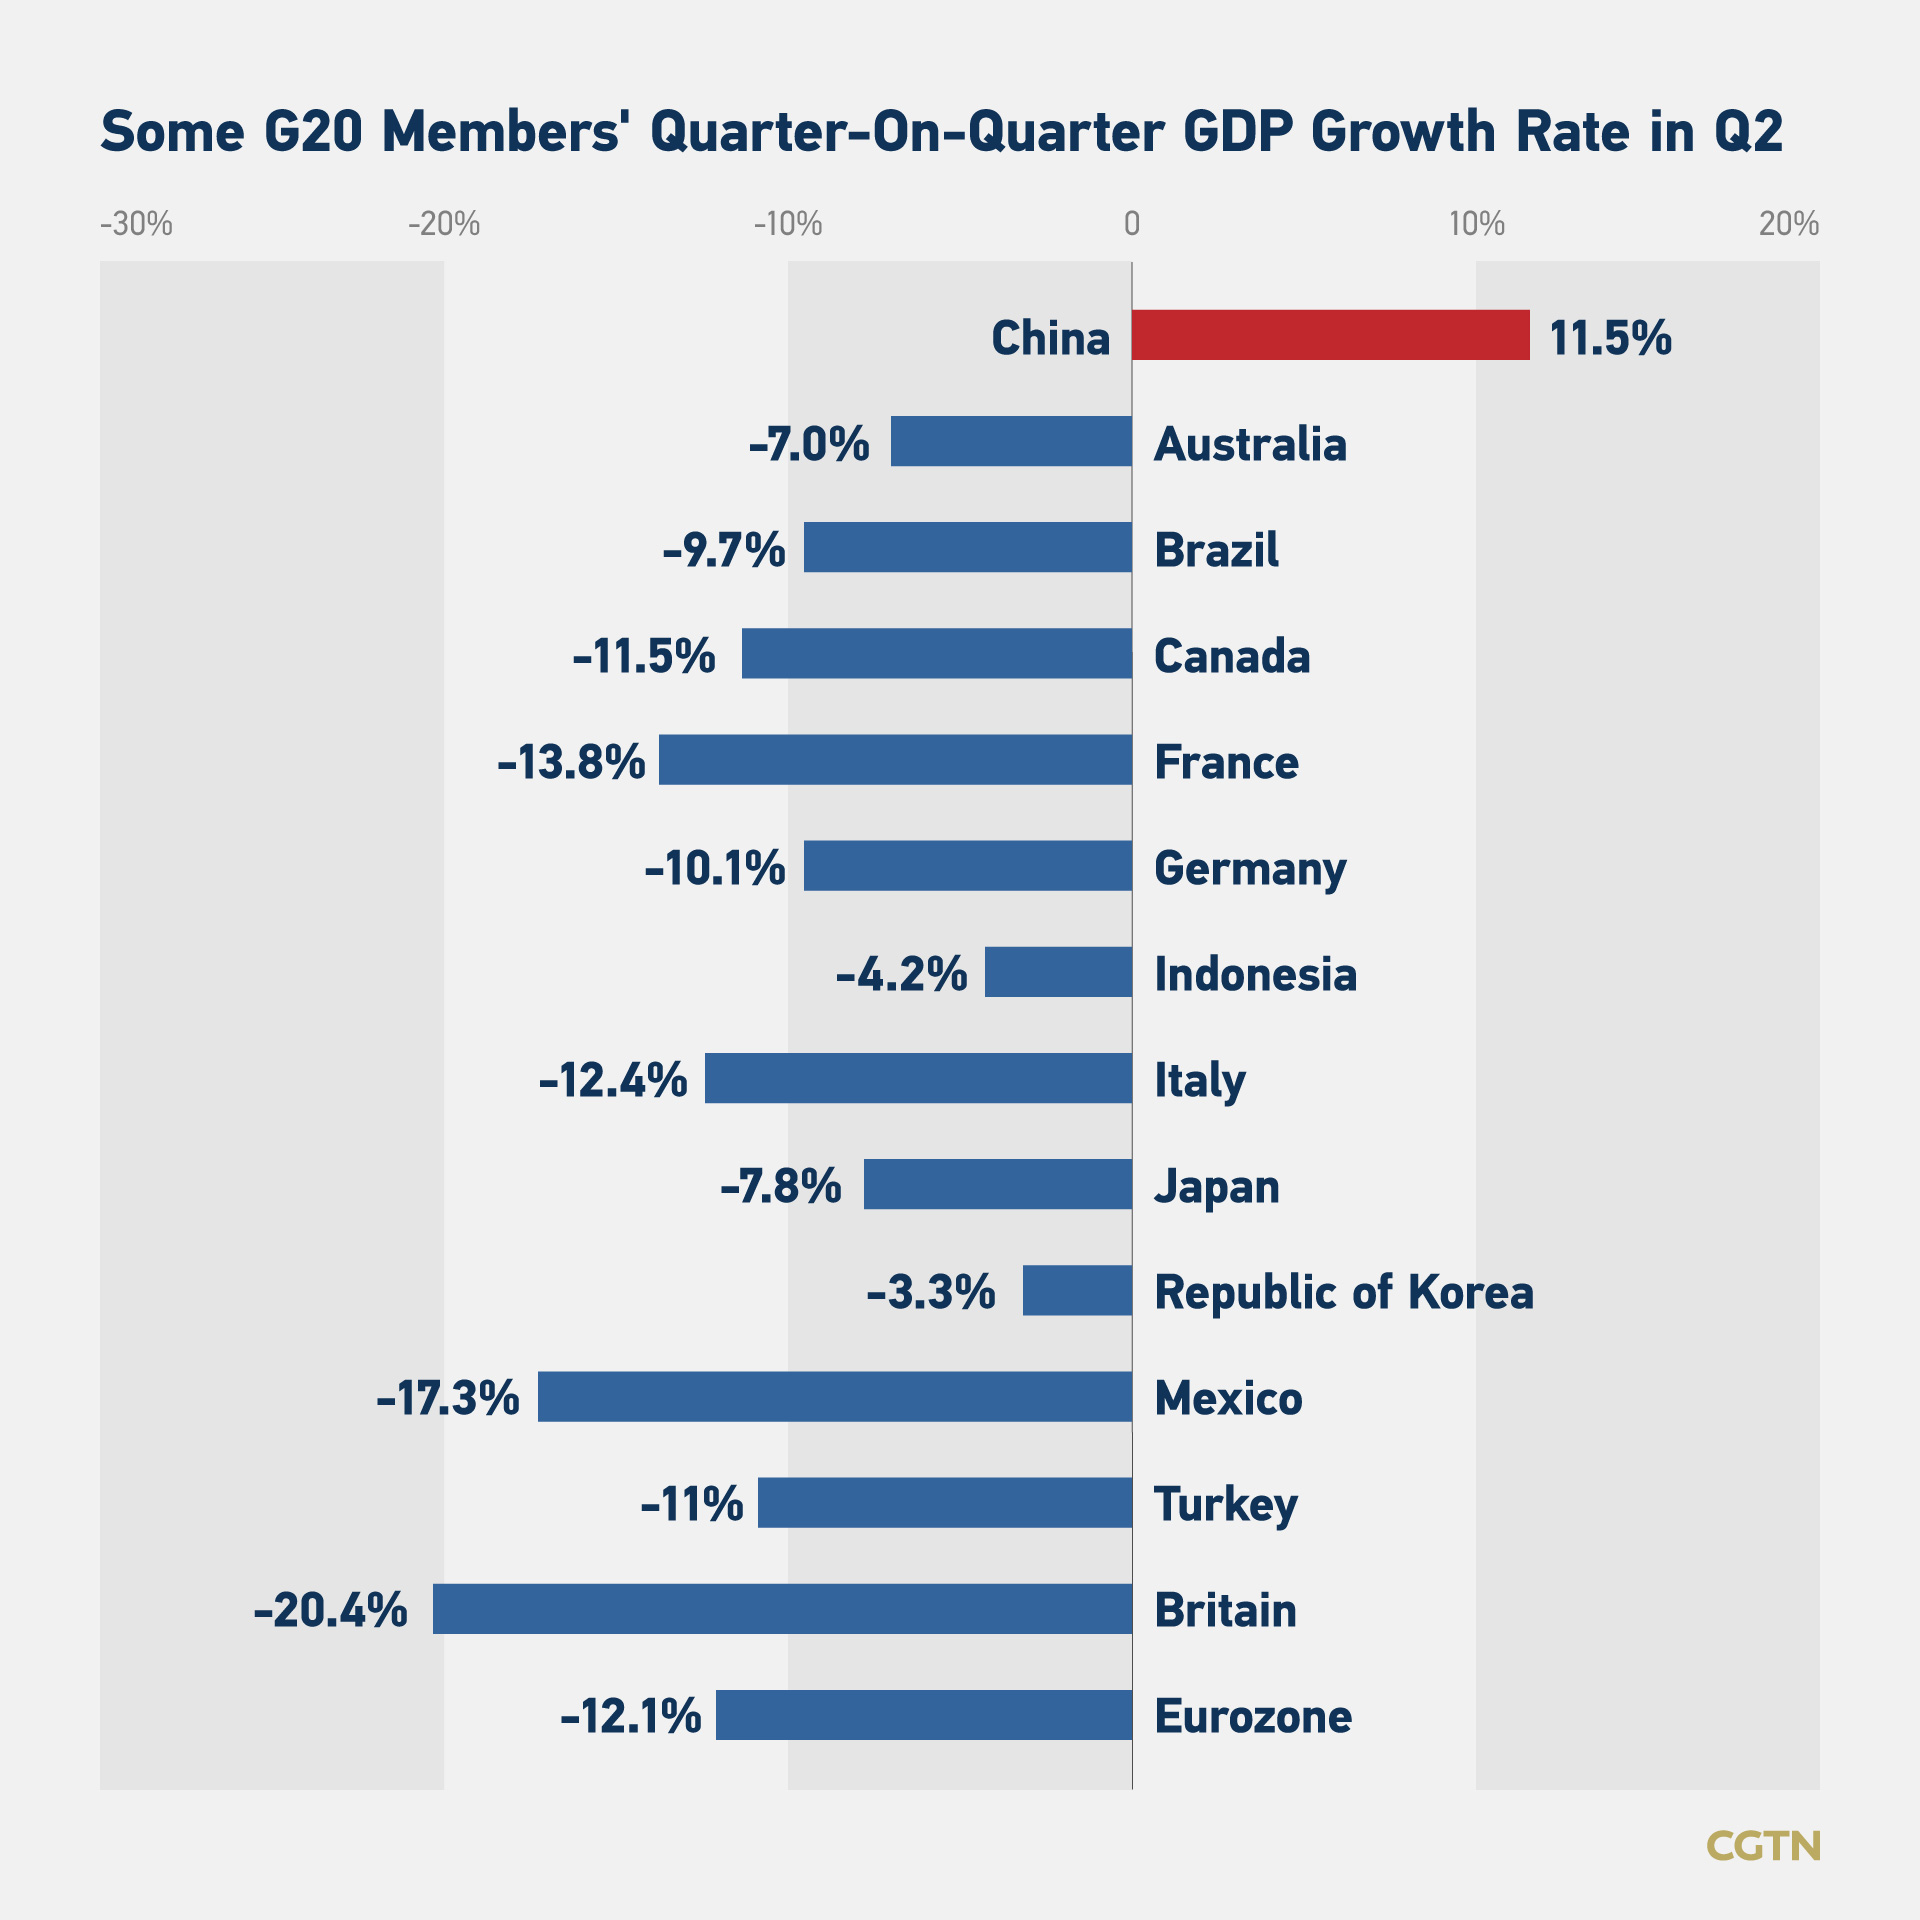 China outperforms most G20 members in Q2 GDP growth CGTN